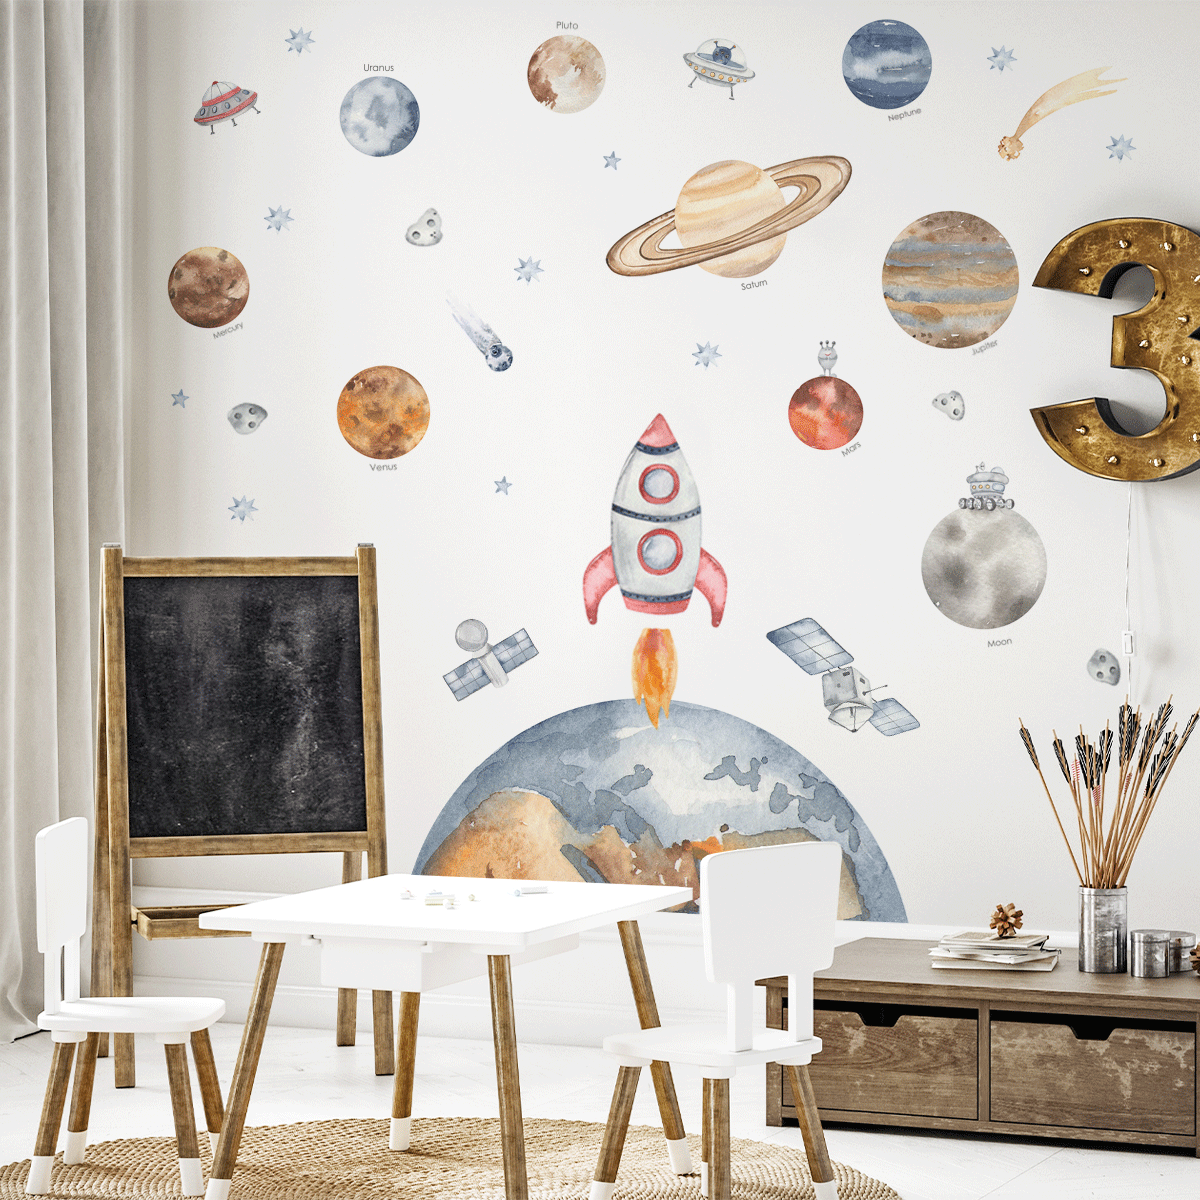 space wall stickers, space wall decals, solar system wall stickers, solar system wall decals, planets wall stickers, planets wall decals